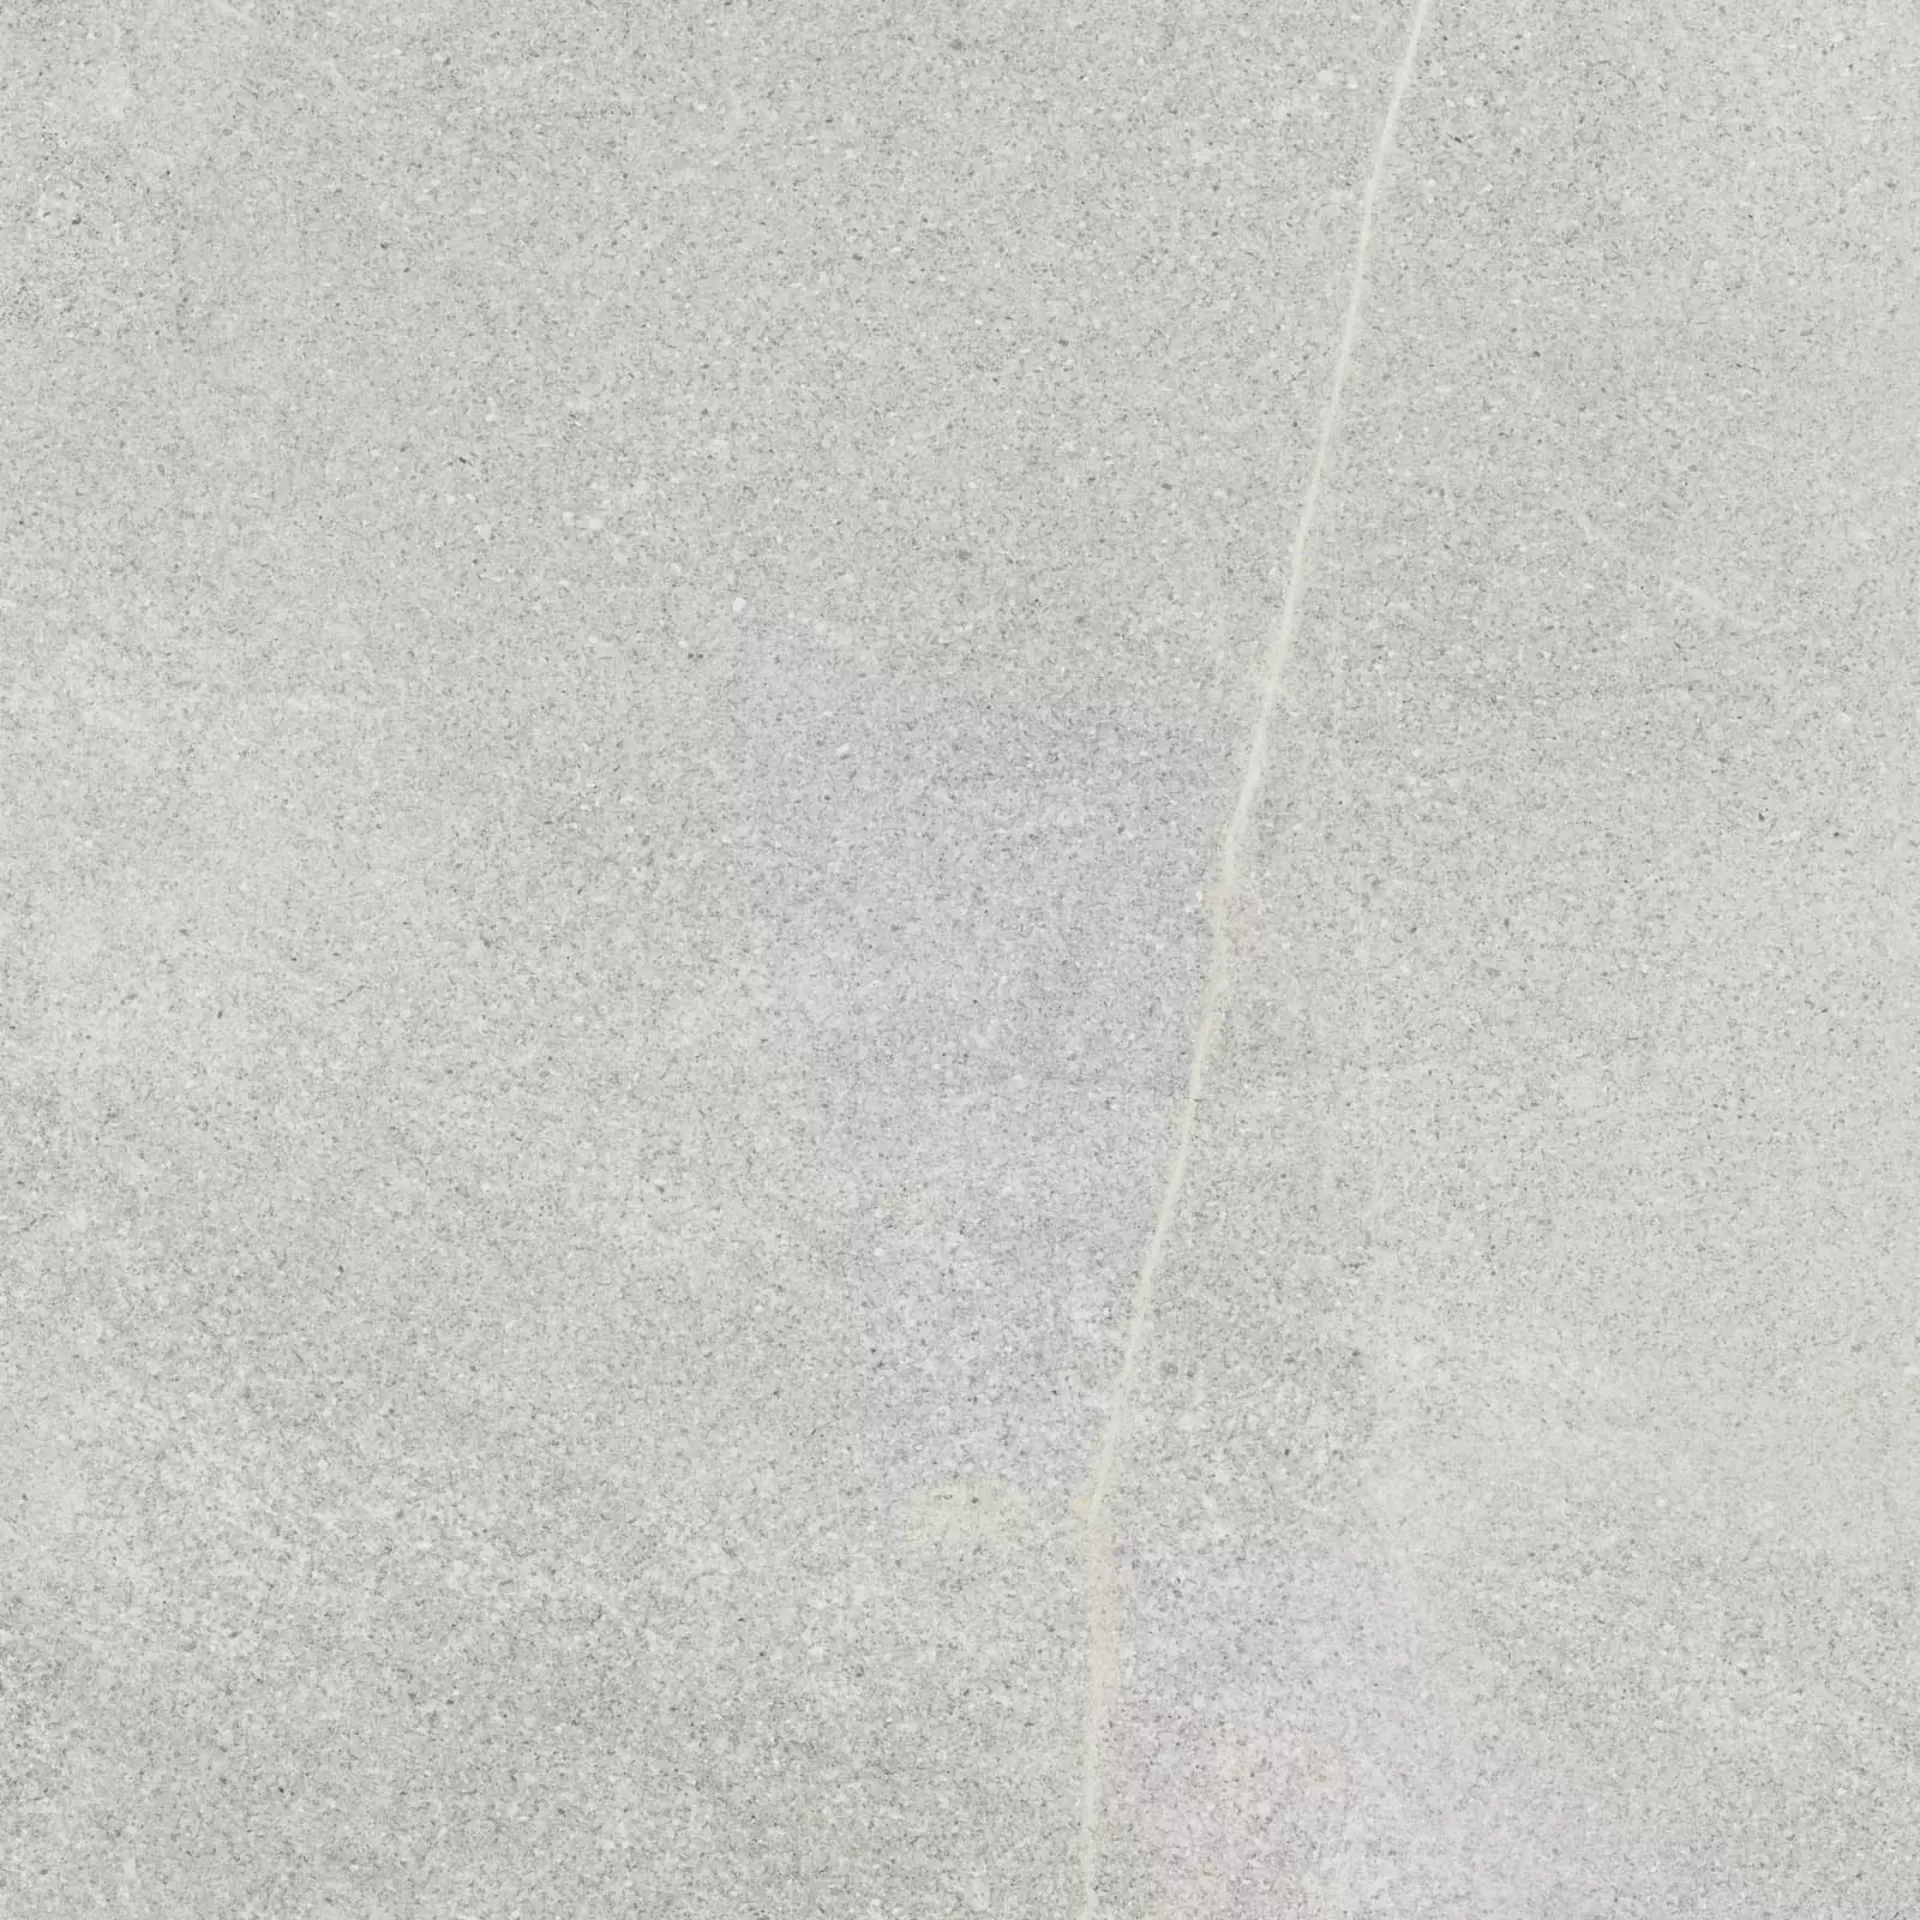 ABK Poetry Stone Piase Ash Naturale PF60010234 60x60cm rectified 8,5mm